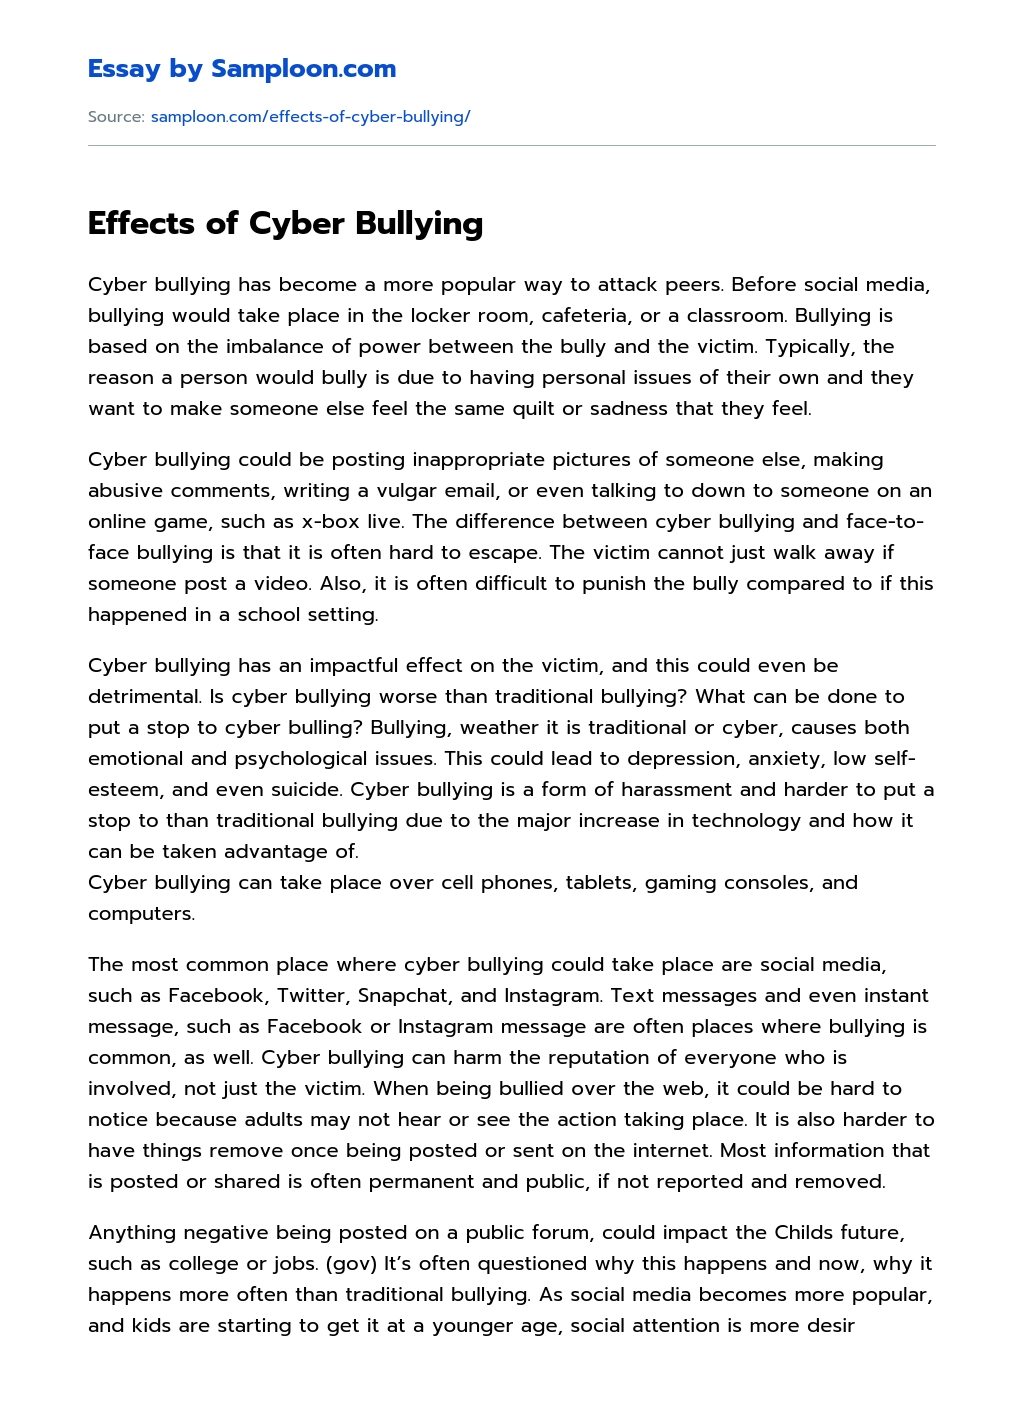 Effects of Cyber Bullying essay